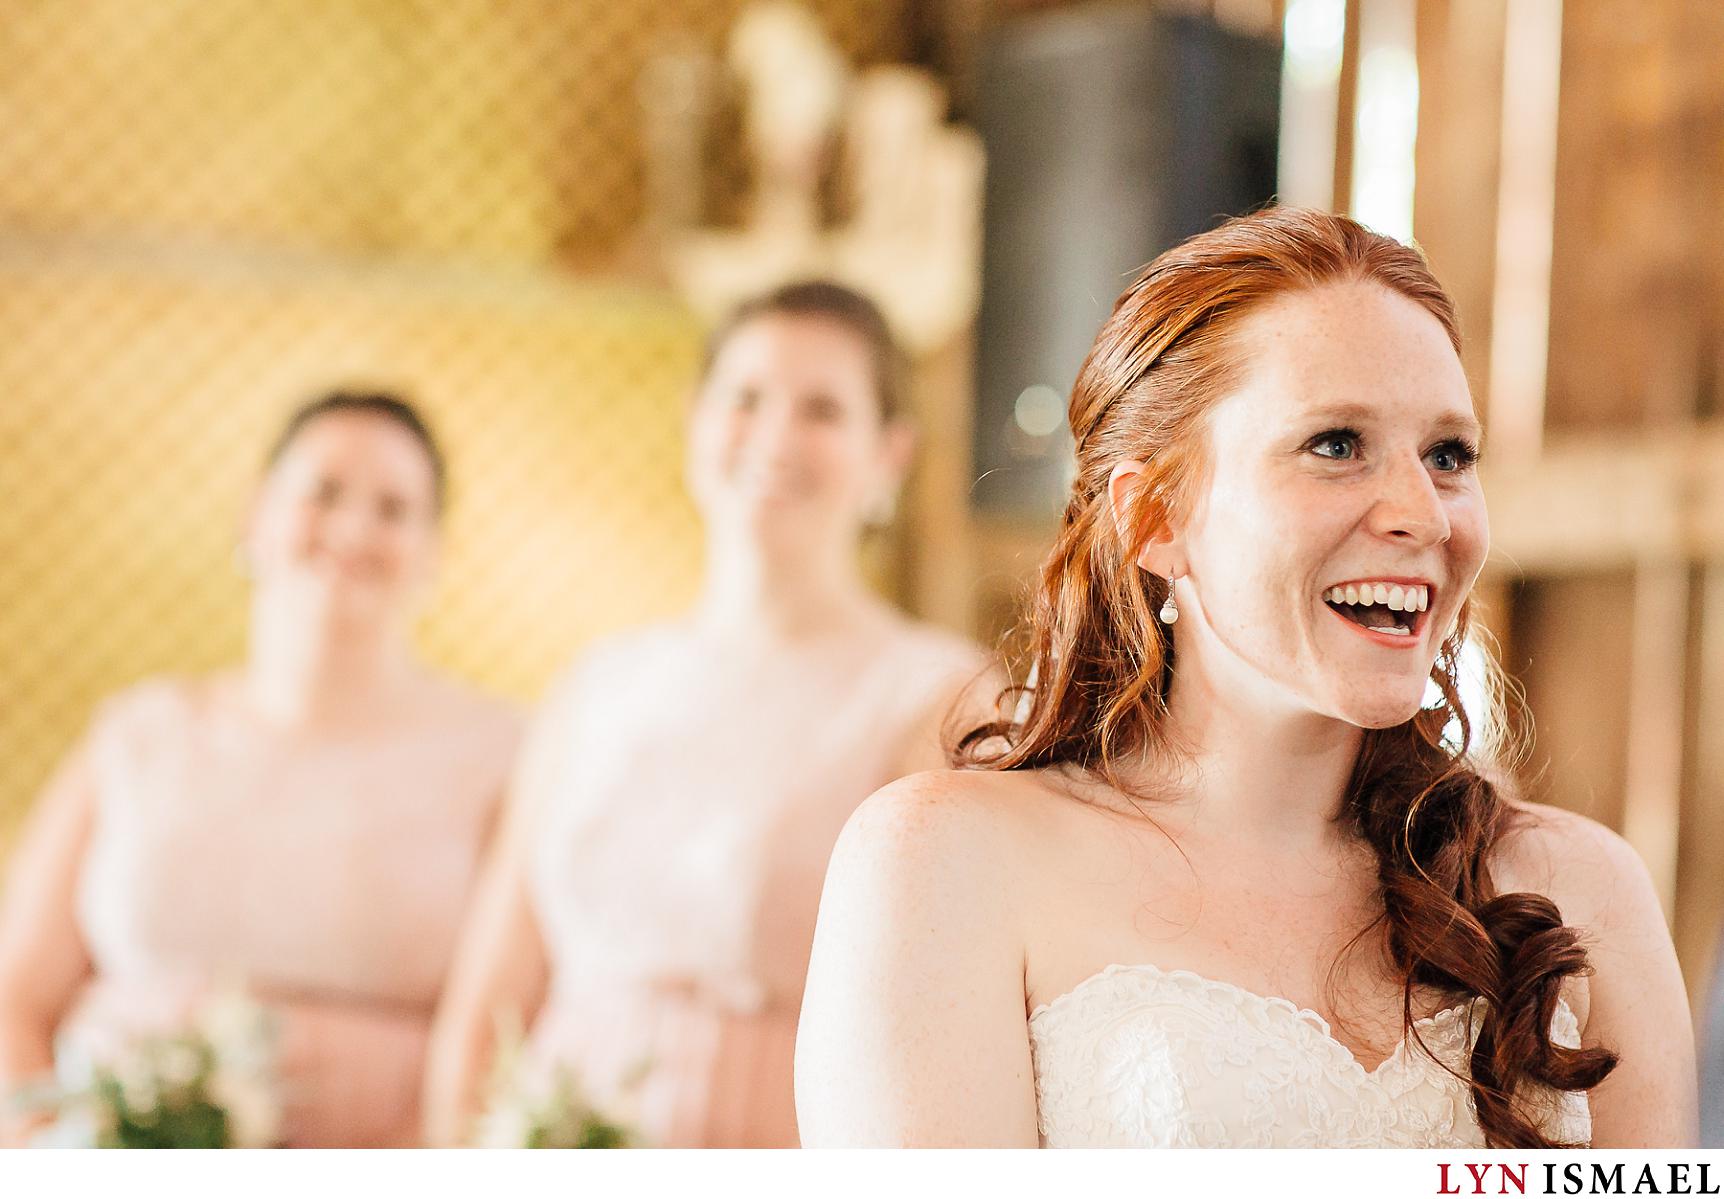 A happy red haired bride on her wedding day